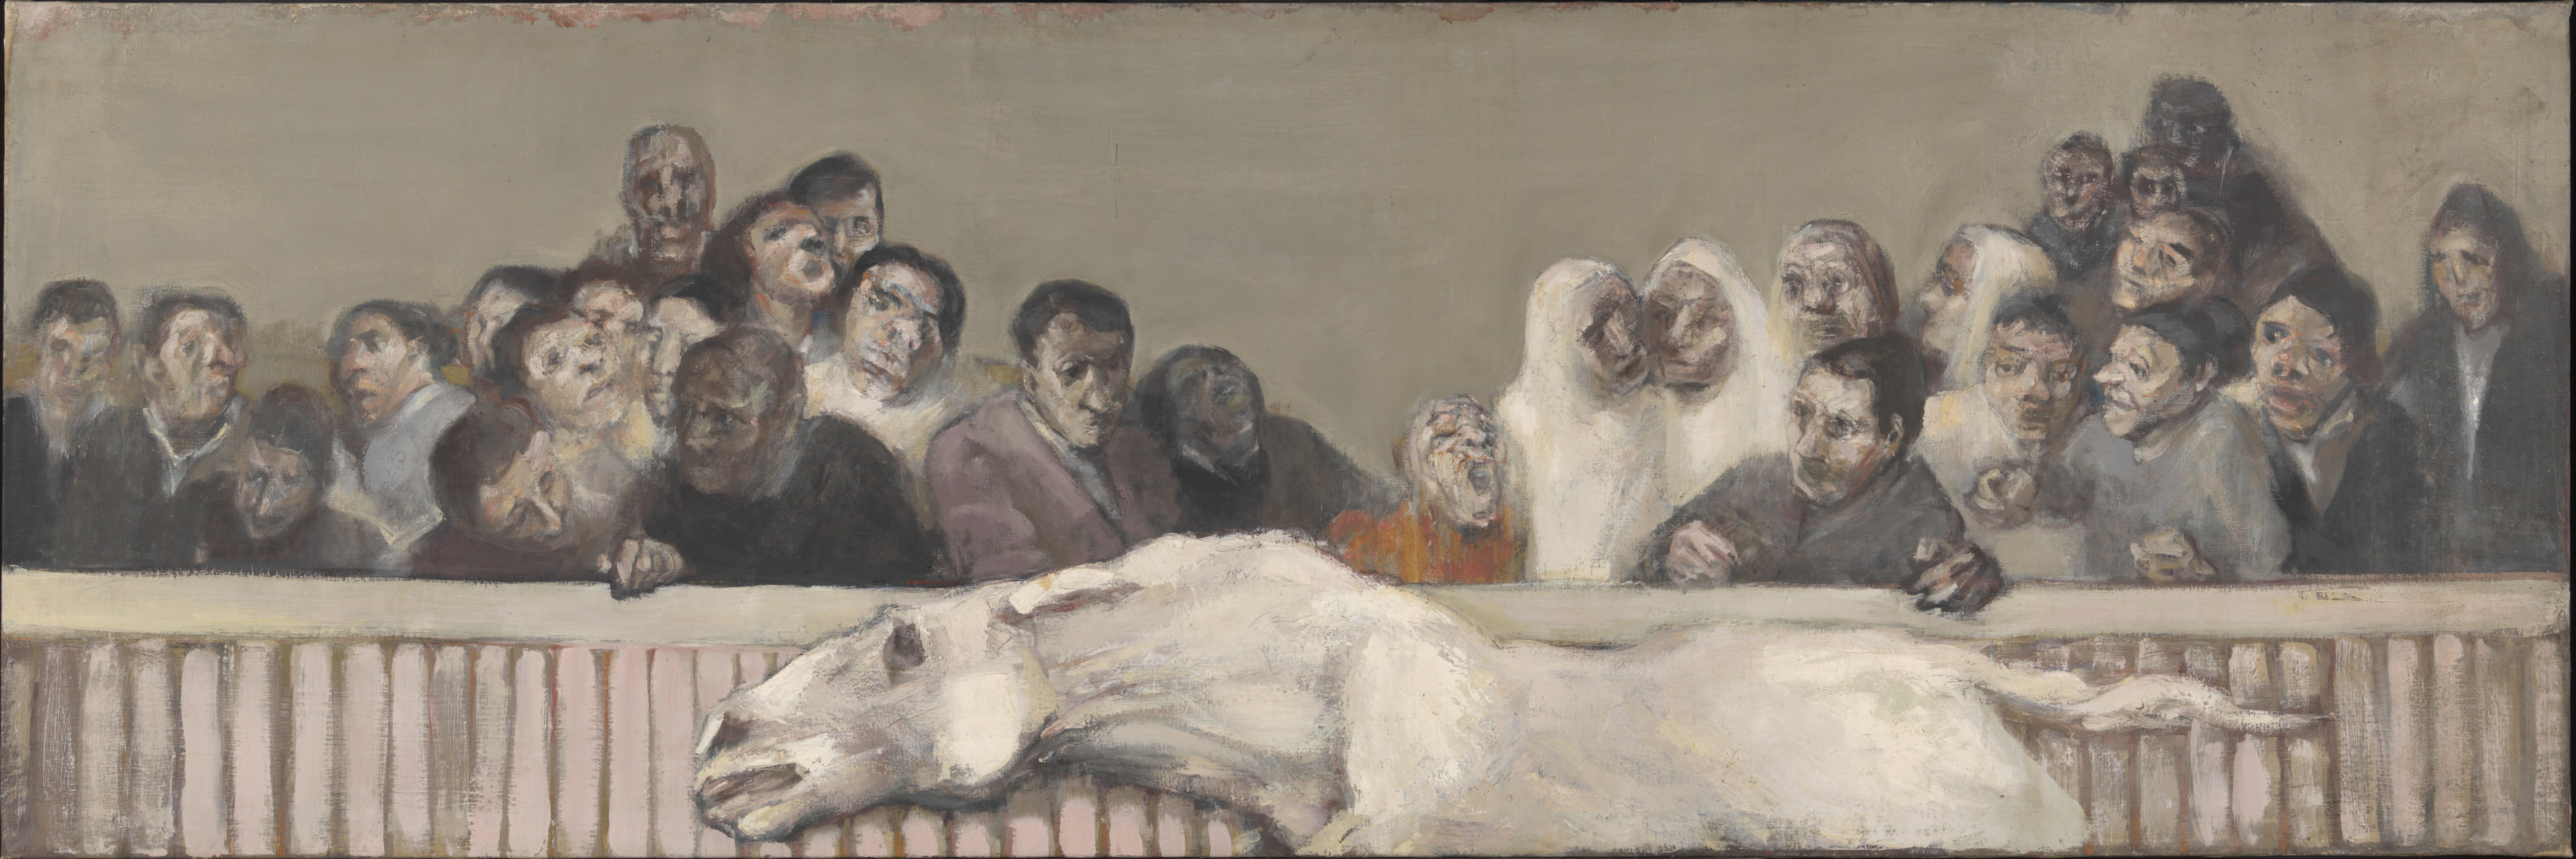 1955–6, oil on canvas, 100 × 300 cm. Collection of Tate (T14296).